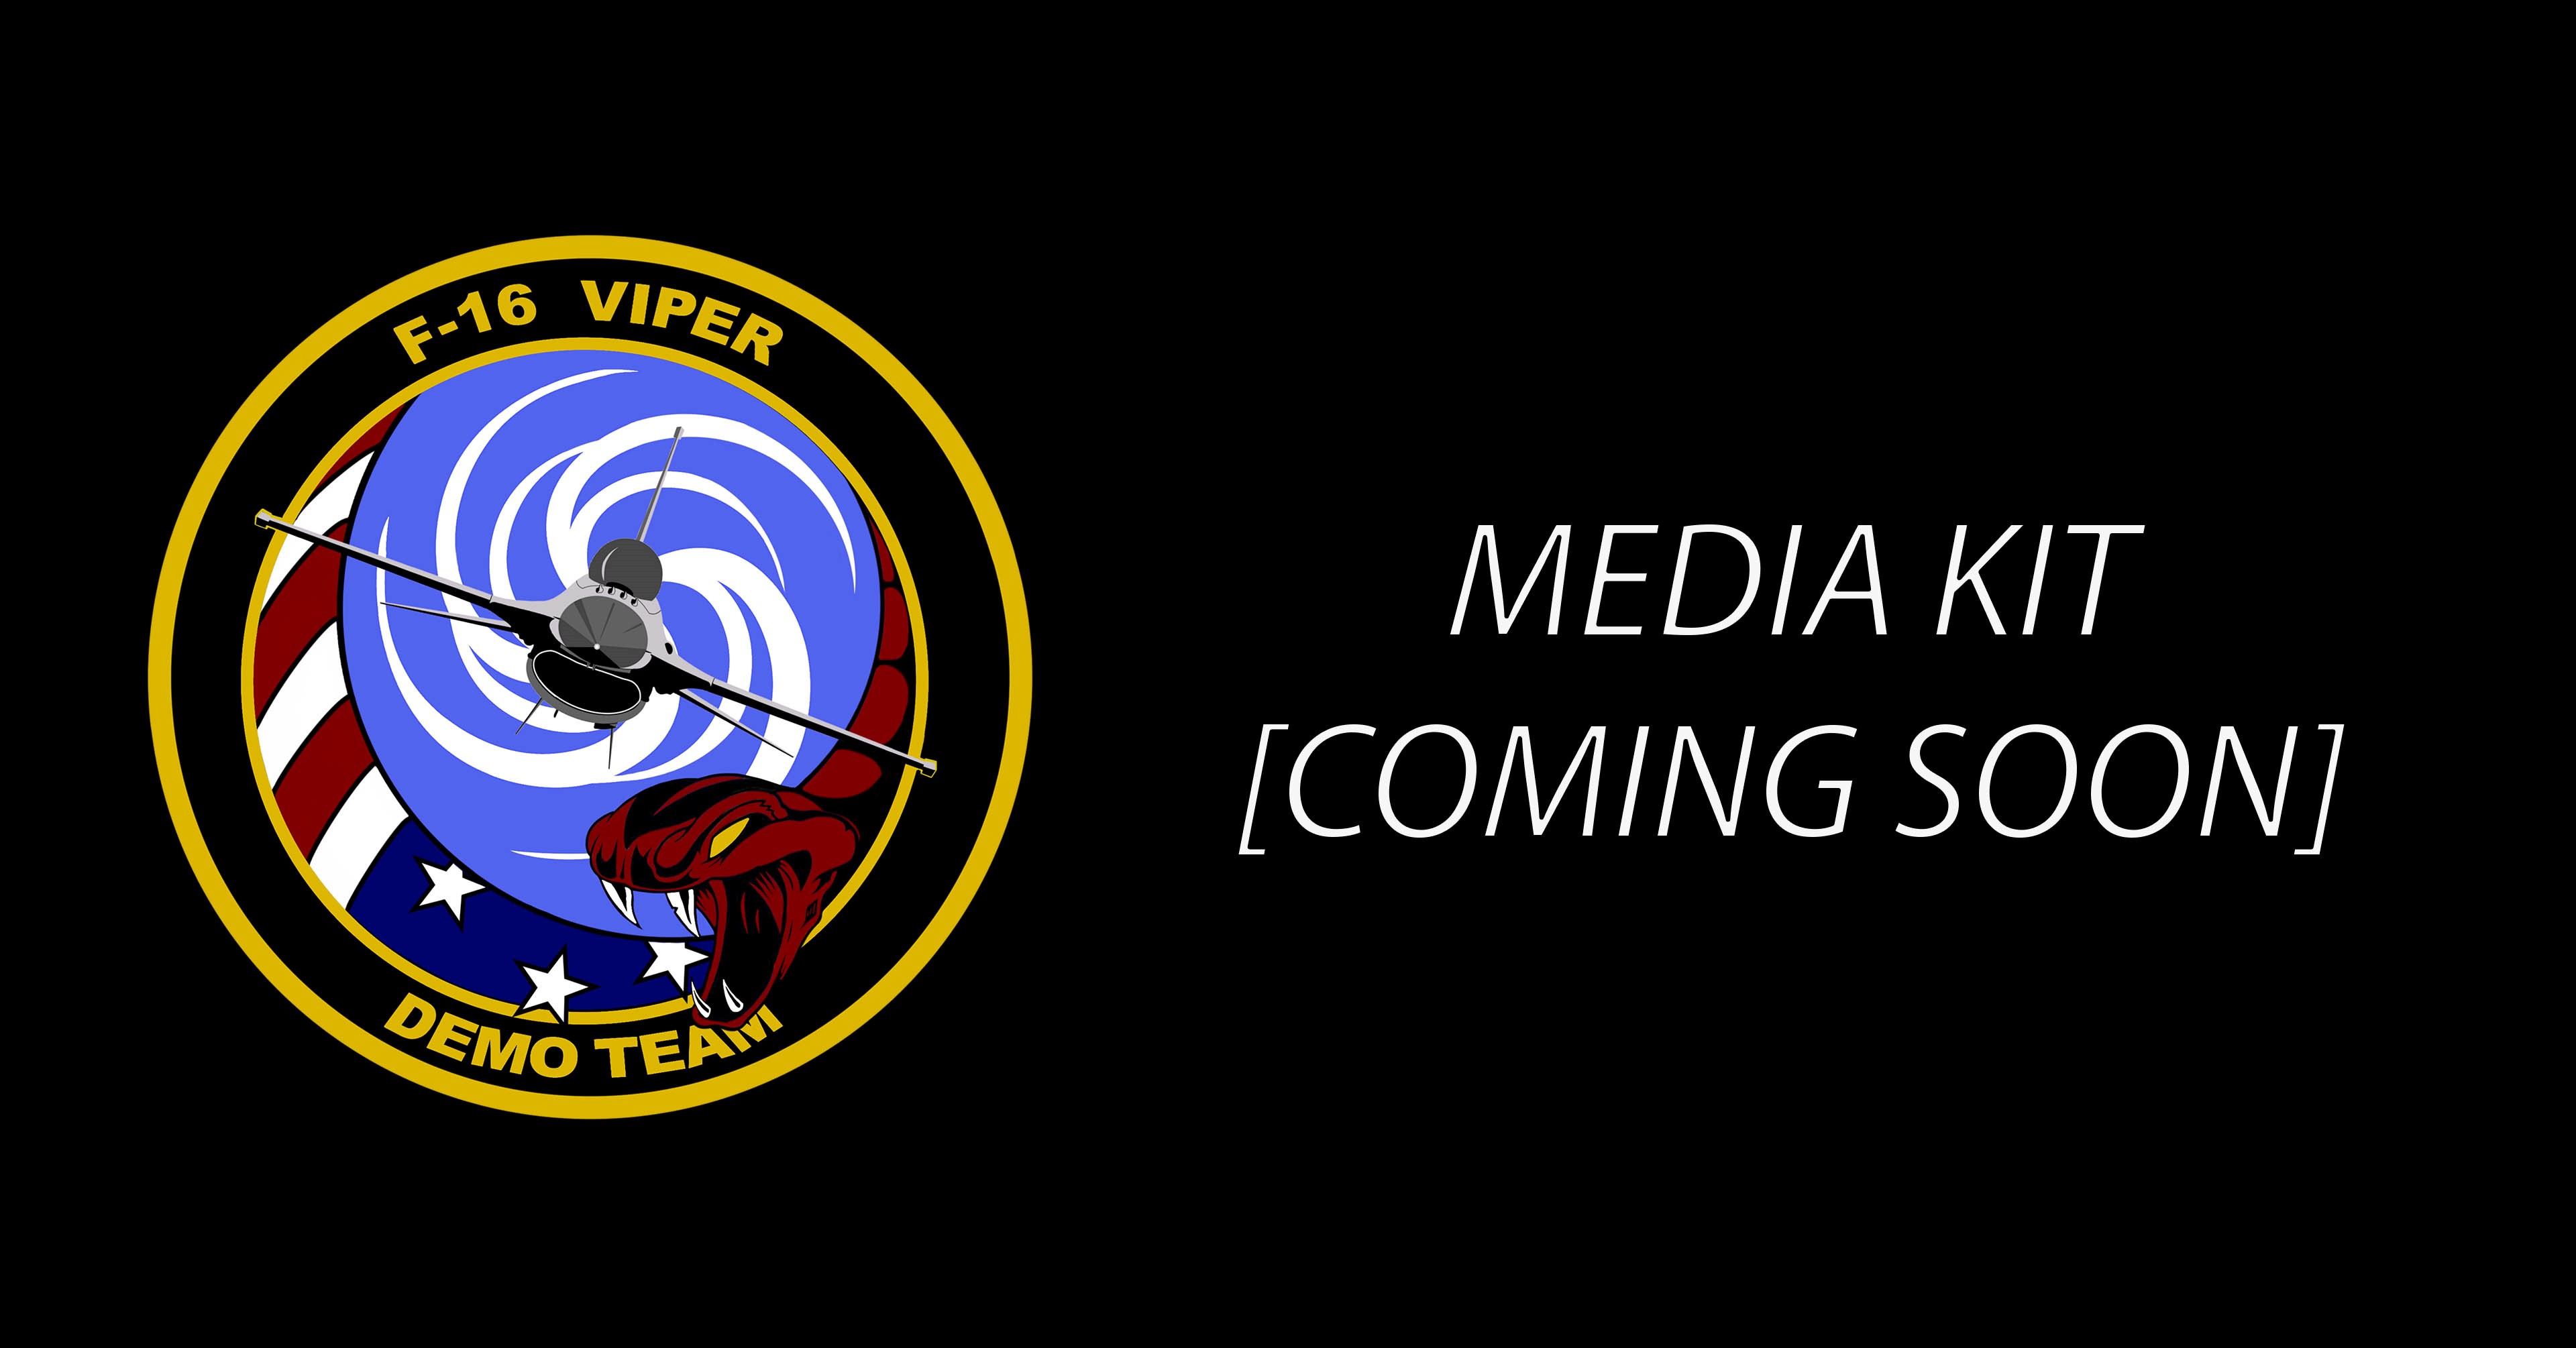 image of viper demo team patch, link to media kit. 